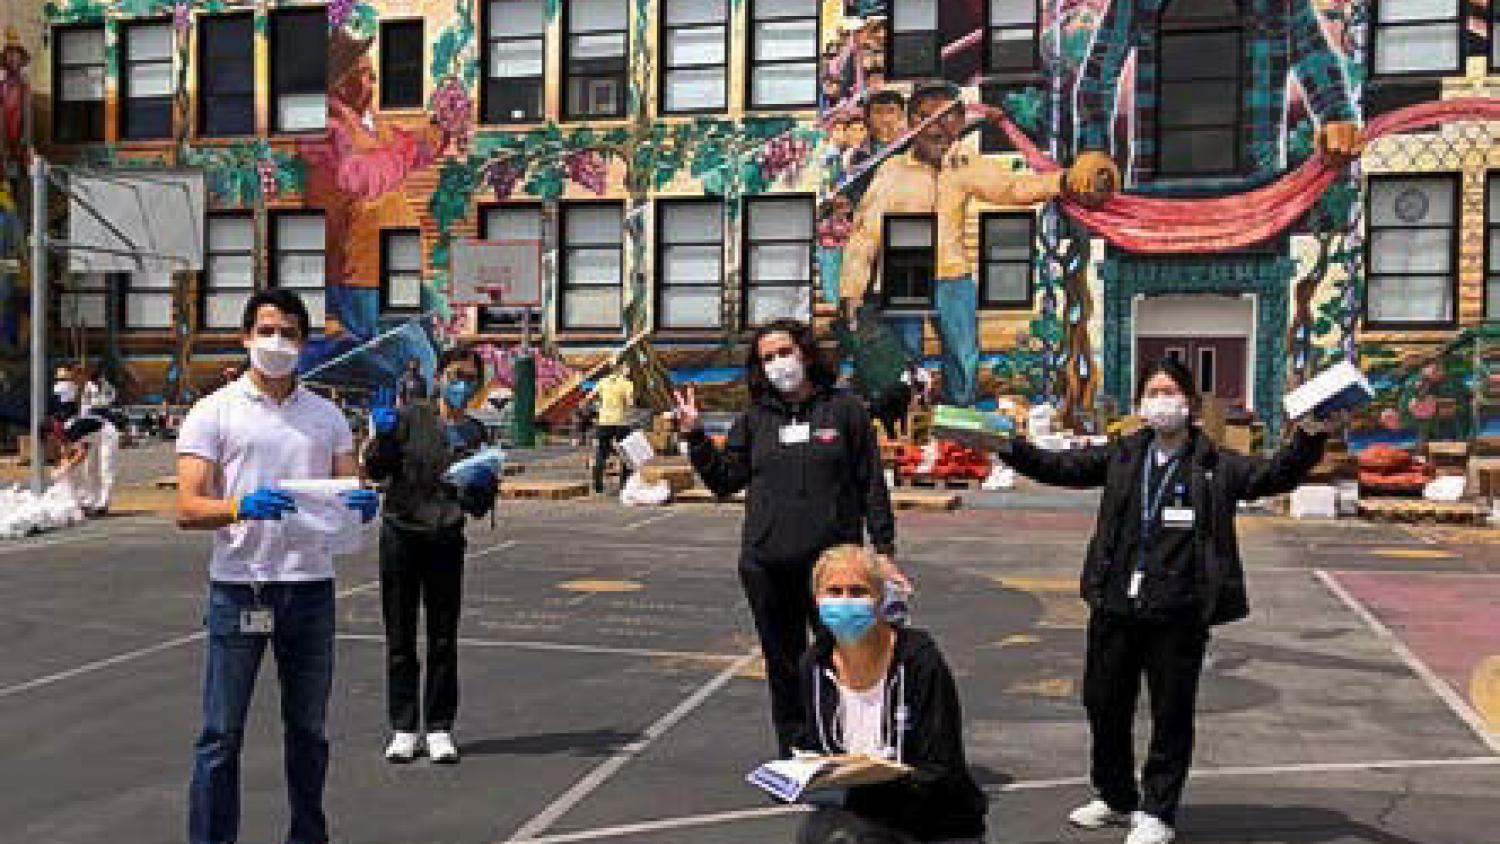 The LCOE team (masked and socially distanced) standing on a school playground  in front of a colorful mural wall.